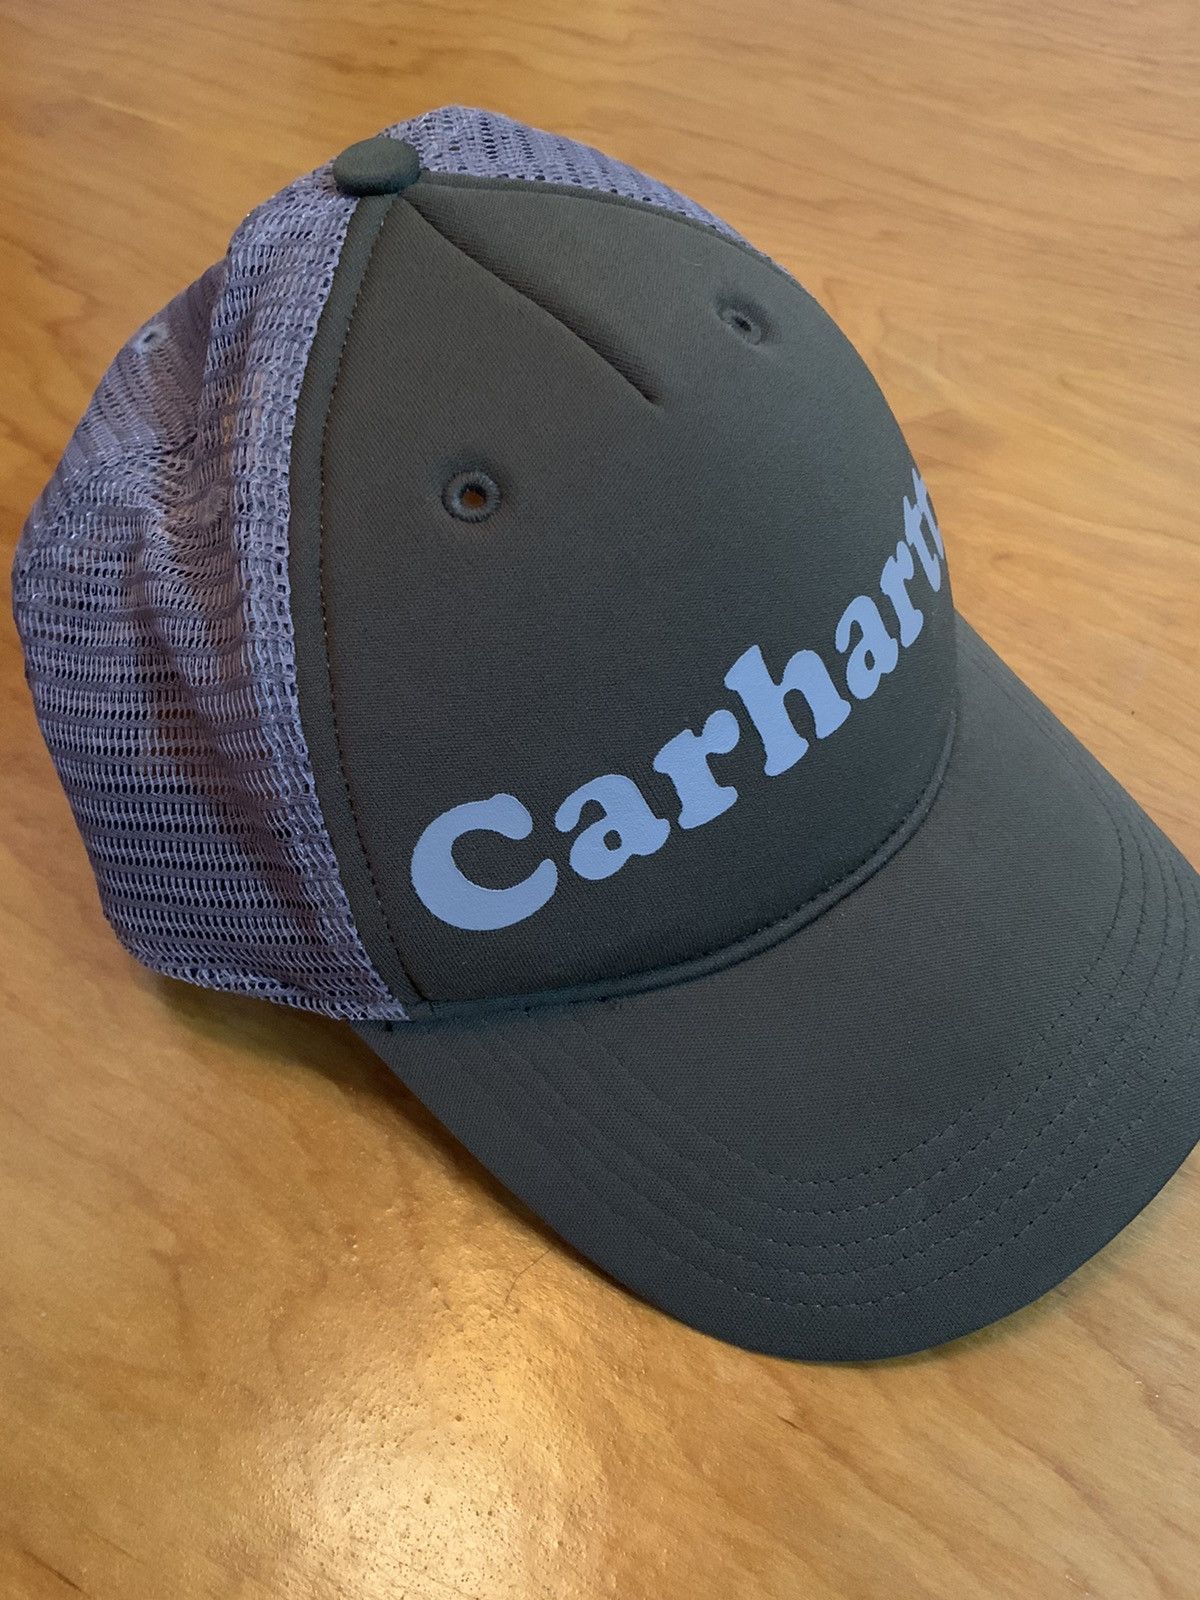 Carhartt Rare Carhartt Spell Out Trucker Hat Low Profile Size ONE SIZE - 8 Thumbnail